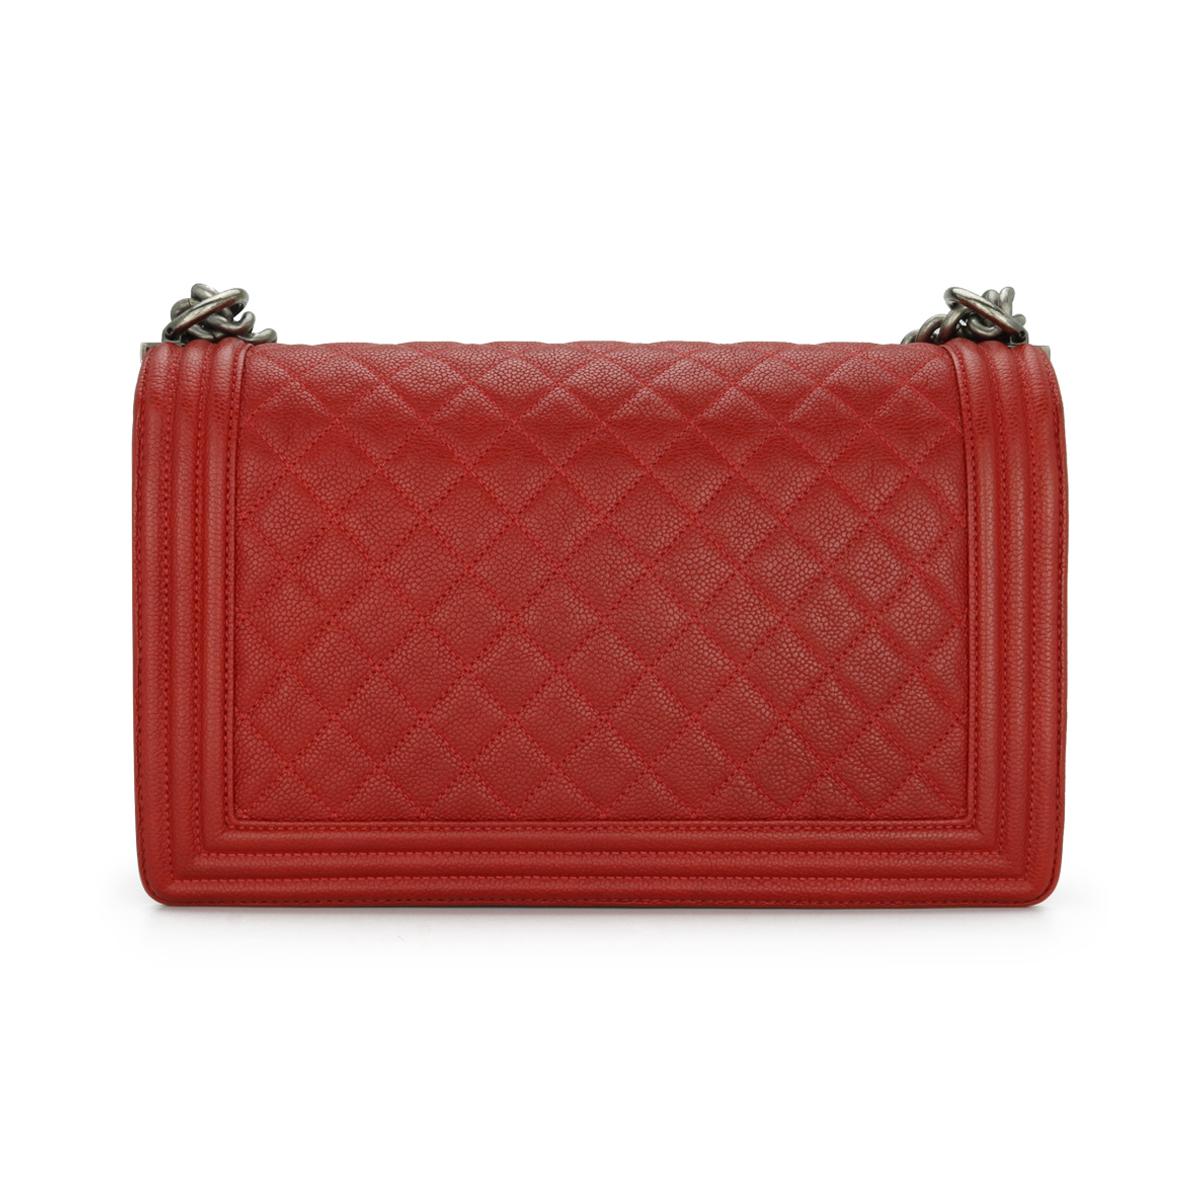 CHANEL New Medium Quilted Boy Bag in Red Caviar with Ruthenium Hardware 2016 In Fair Condition For Sale In Huddersfield, GB